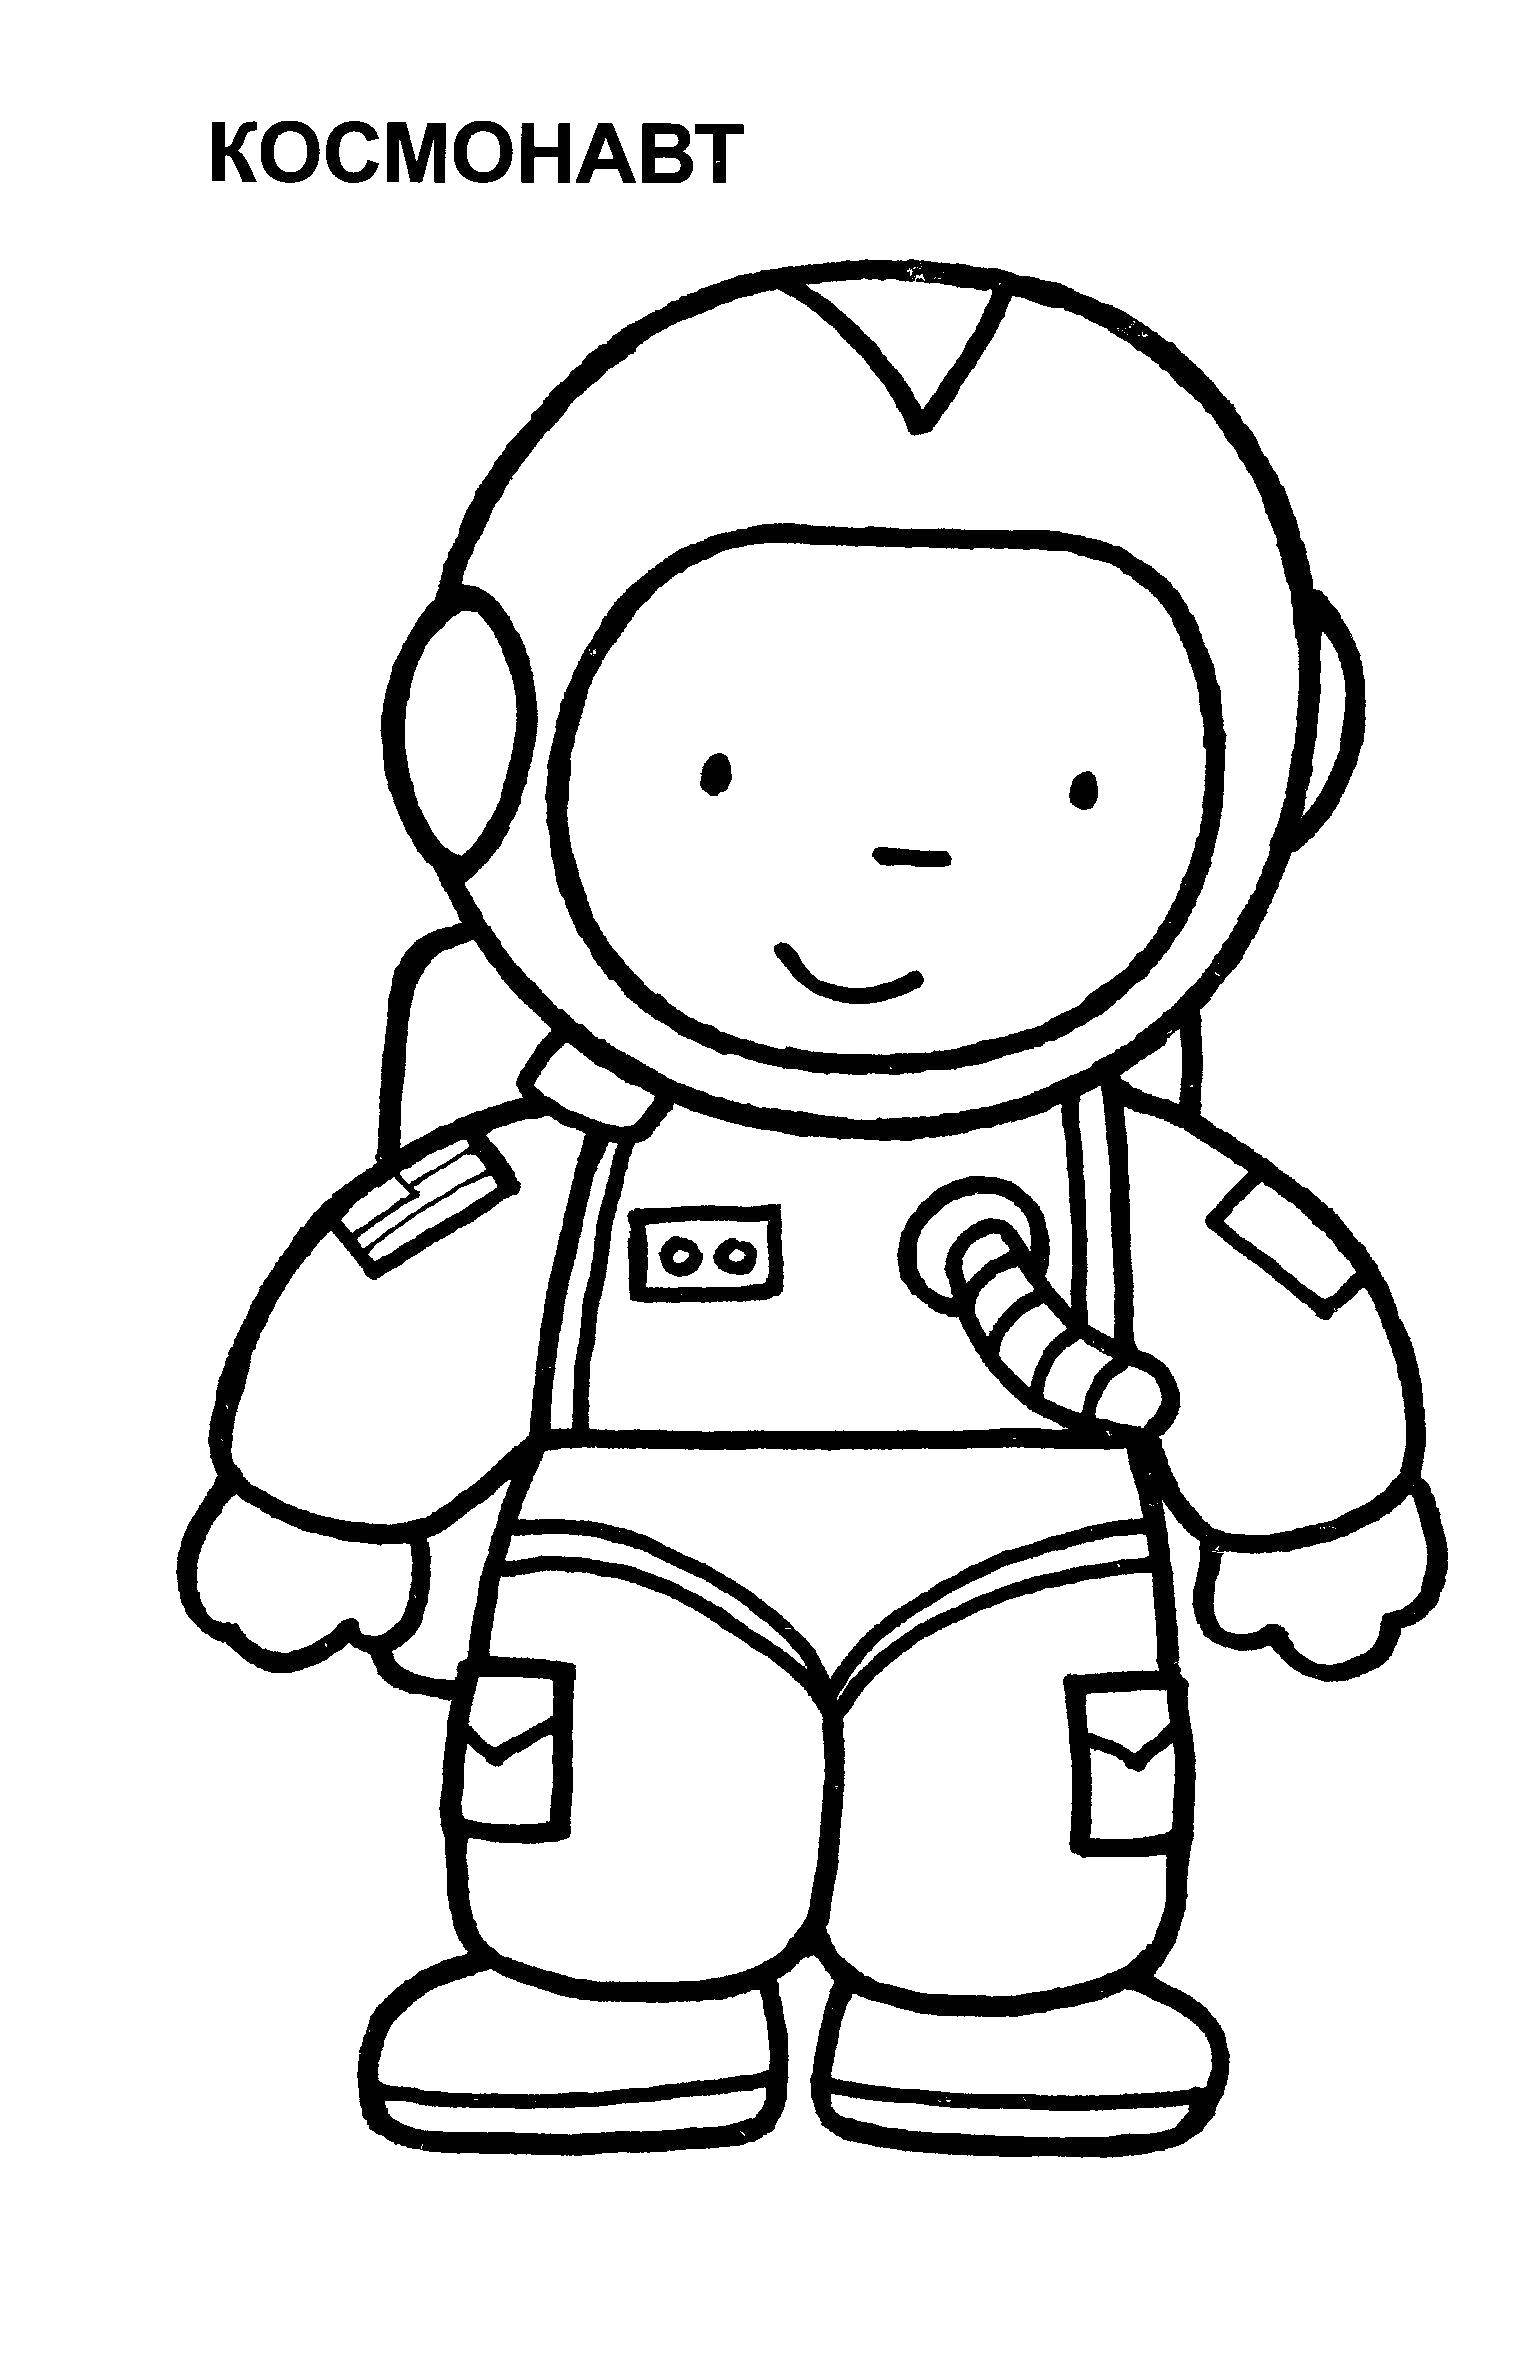 Coloring Astronaut. Category Coloring pages for kids. Tags:  astronaut.